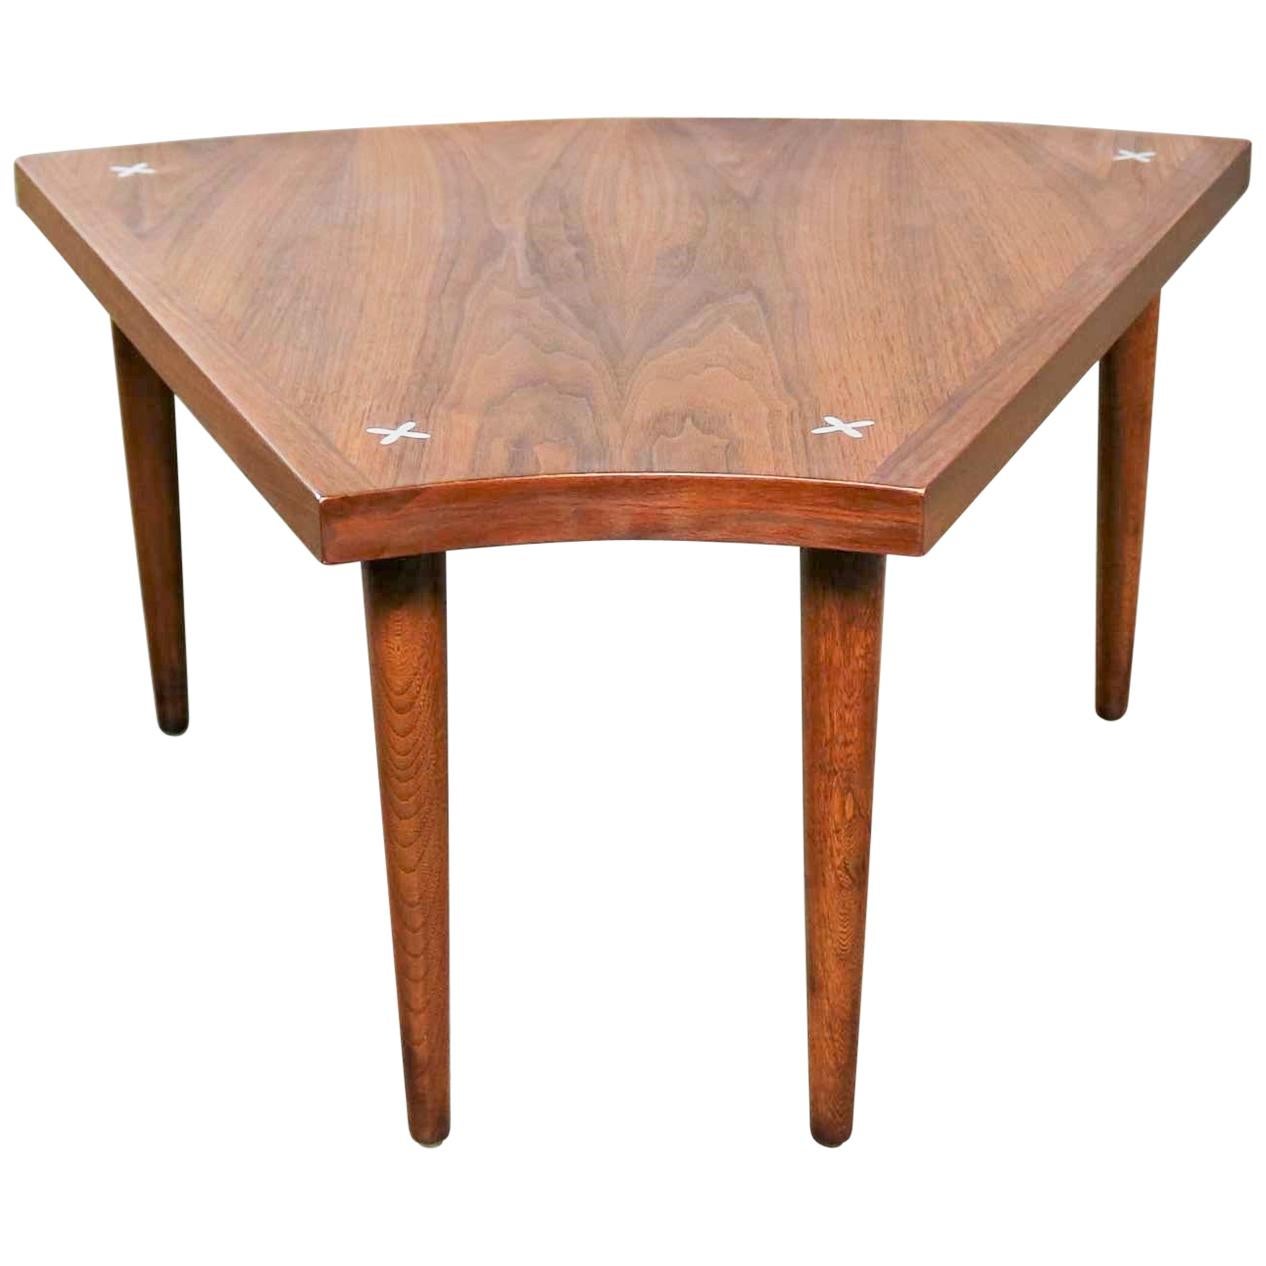 Walnut Wedge Shape End Table Attributed to Merton Gershun for American of Martin